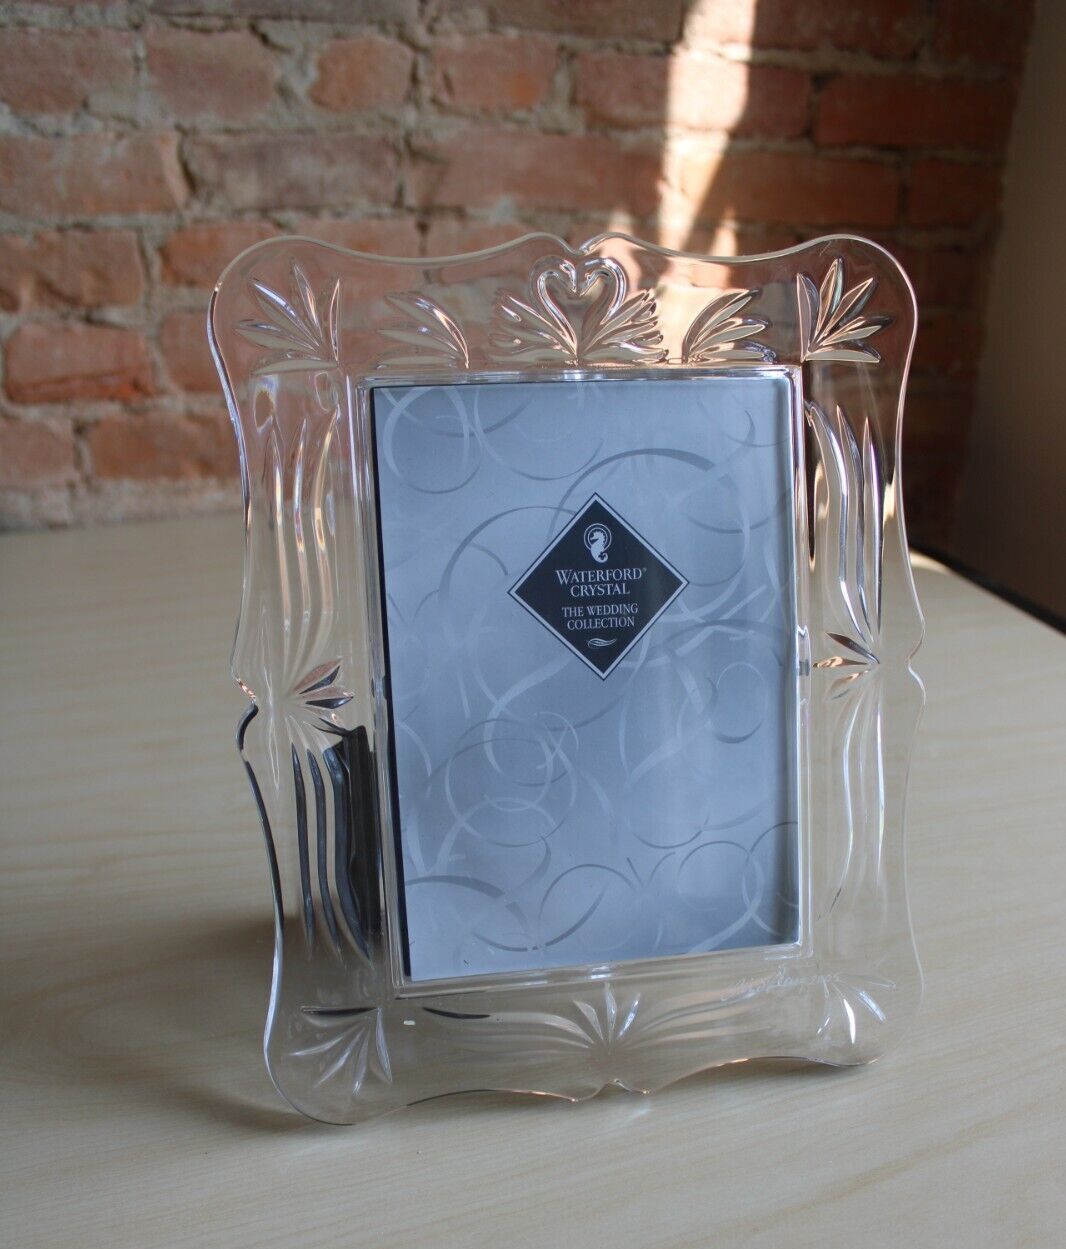 WATERFORD CRYSTAL WEDDING HEIRLOOM 5X7 PICTURE FRAME SWANS LUXURY Signed Artist